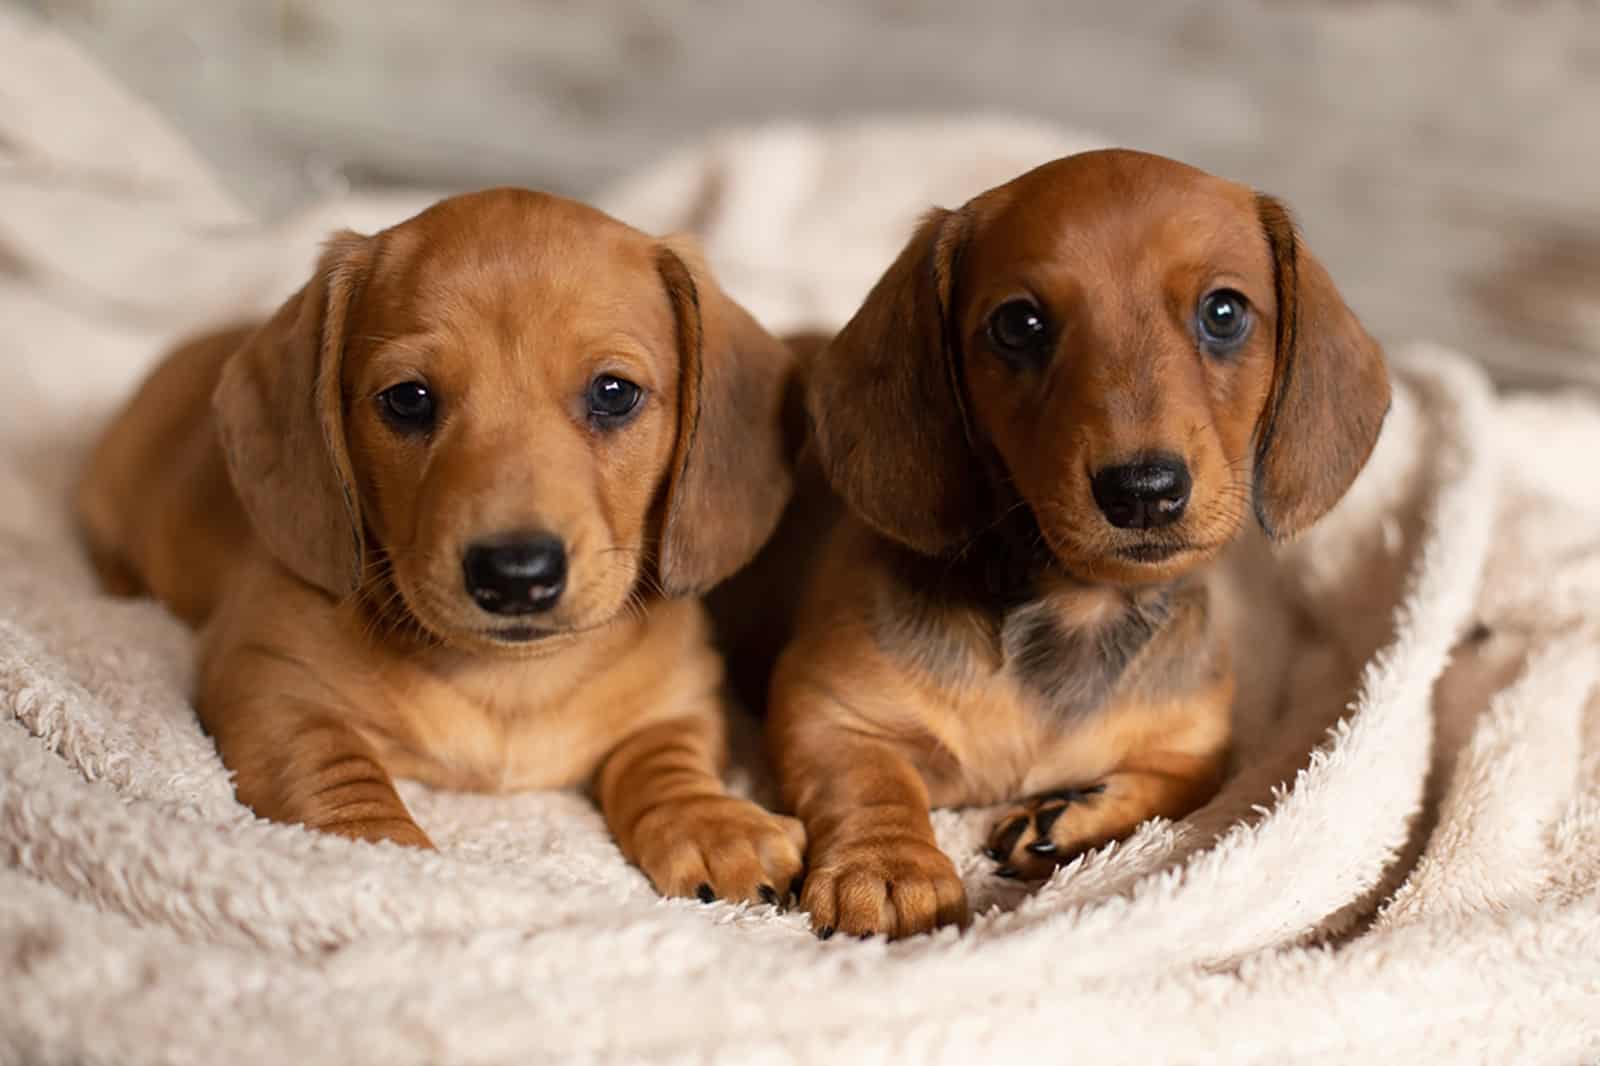 two dachshund puppies lying together